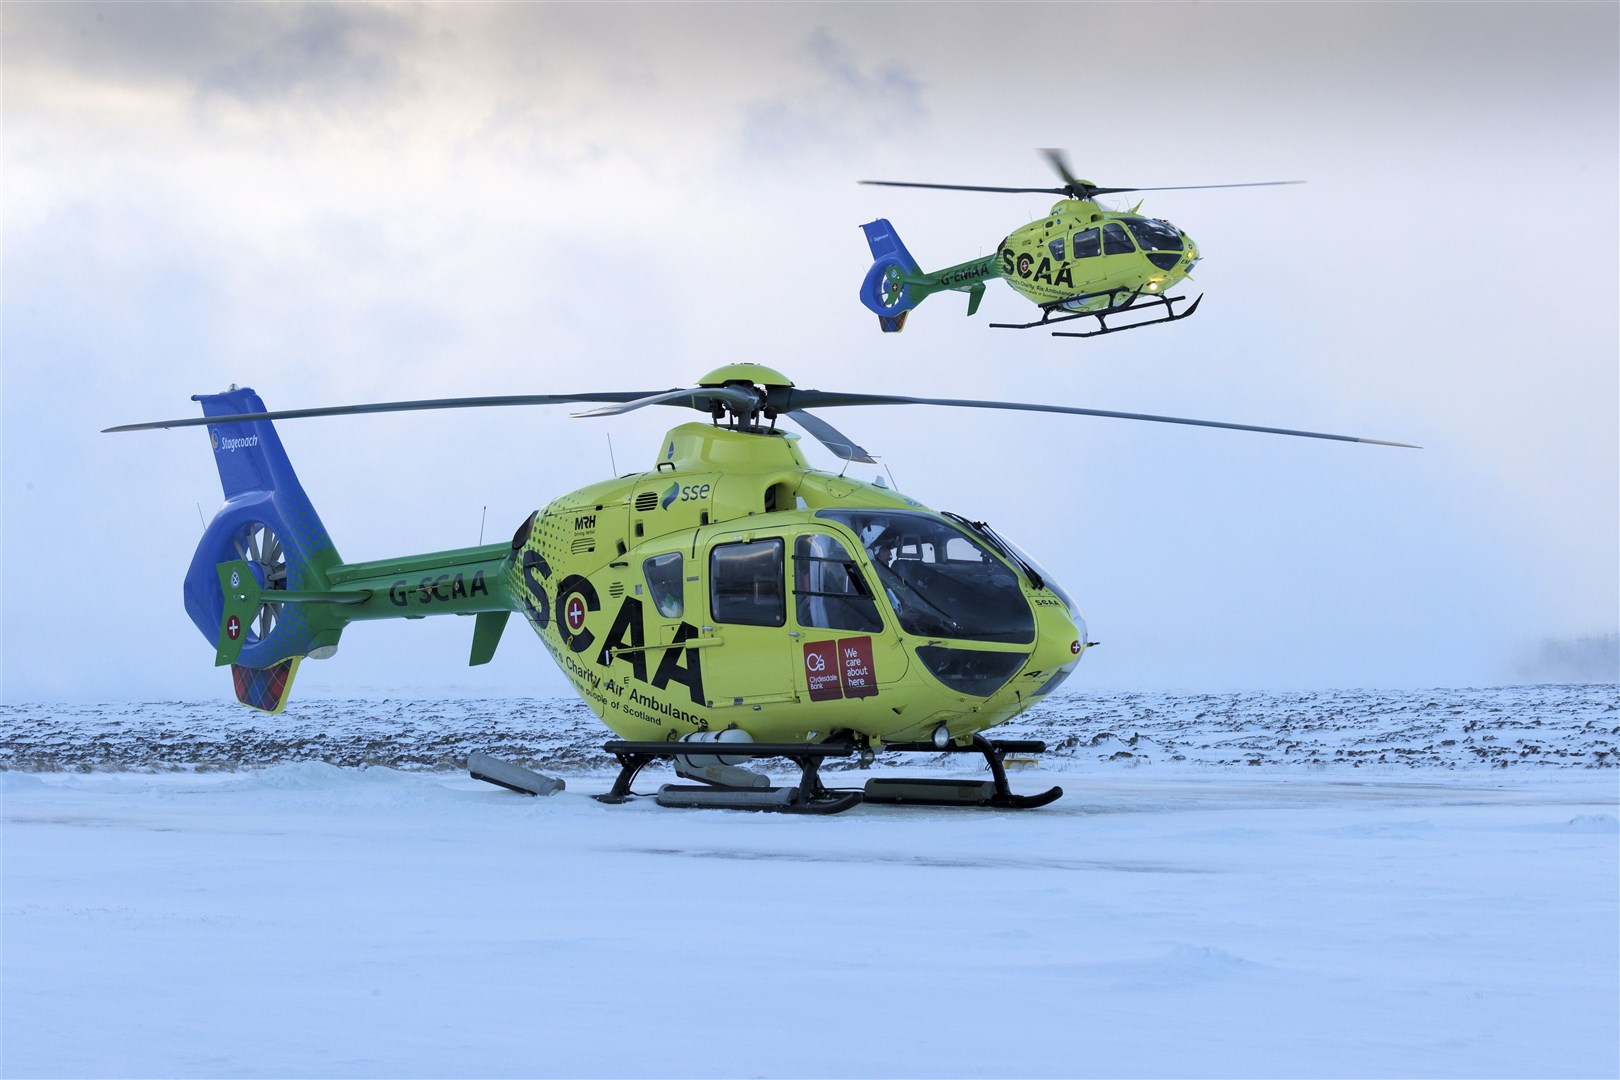 Scotland's Charity Air Ambulance's two helicopters Helimed 76 (G-SCAA) and Helimed 79 (G-EMAA) pictured together at SCAA's base at Perth Airport. Picture by Graeme Hart.